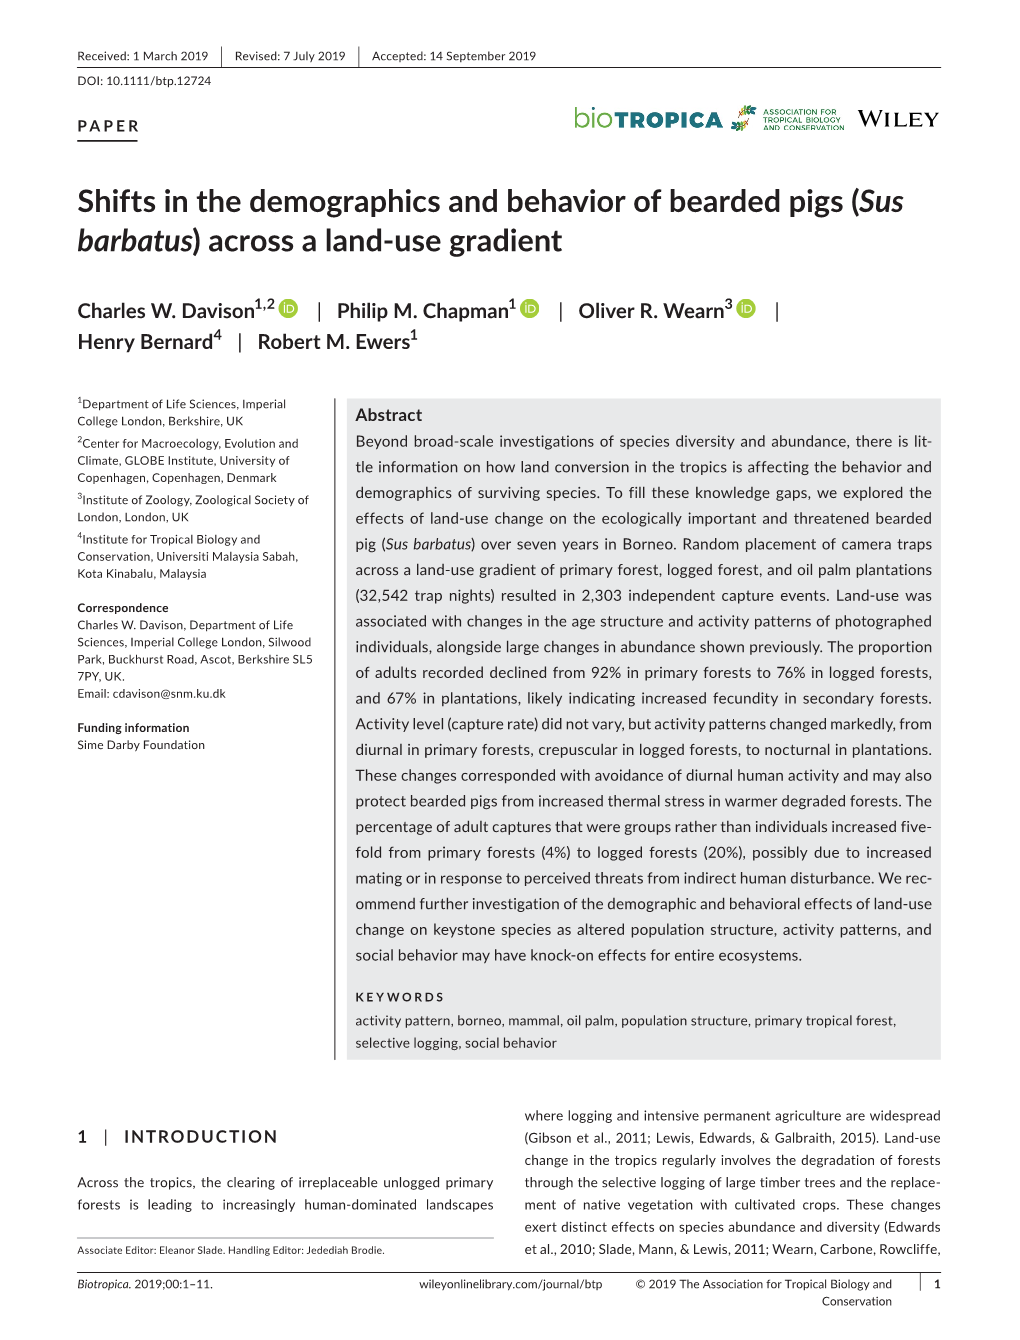 Shifts in the Demographics and Behavior of Bearded Pigs (Sus Barbatus) Across a Land-Use Gradient